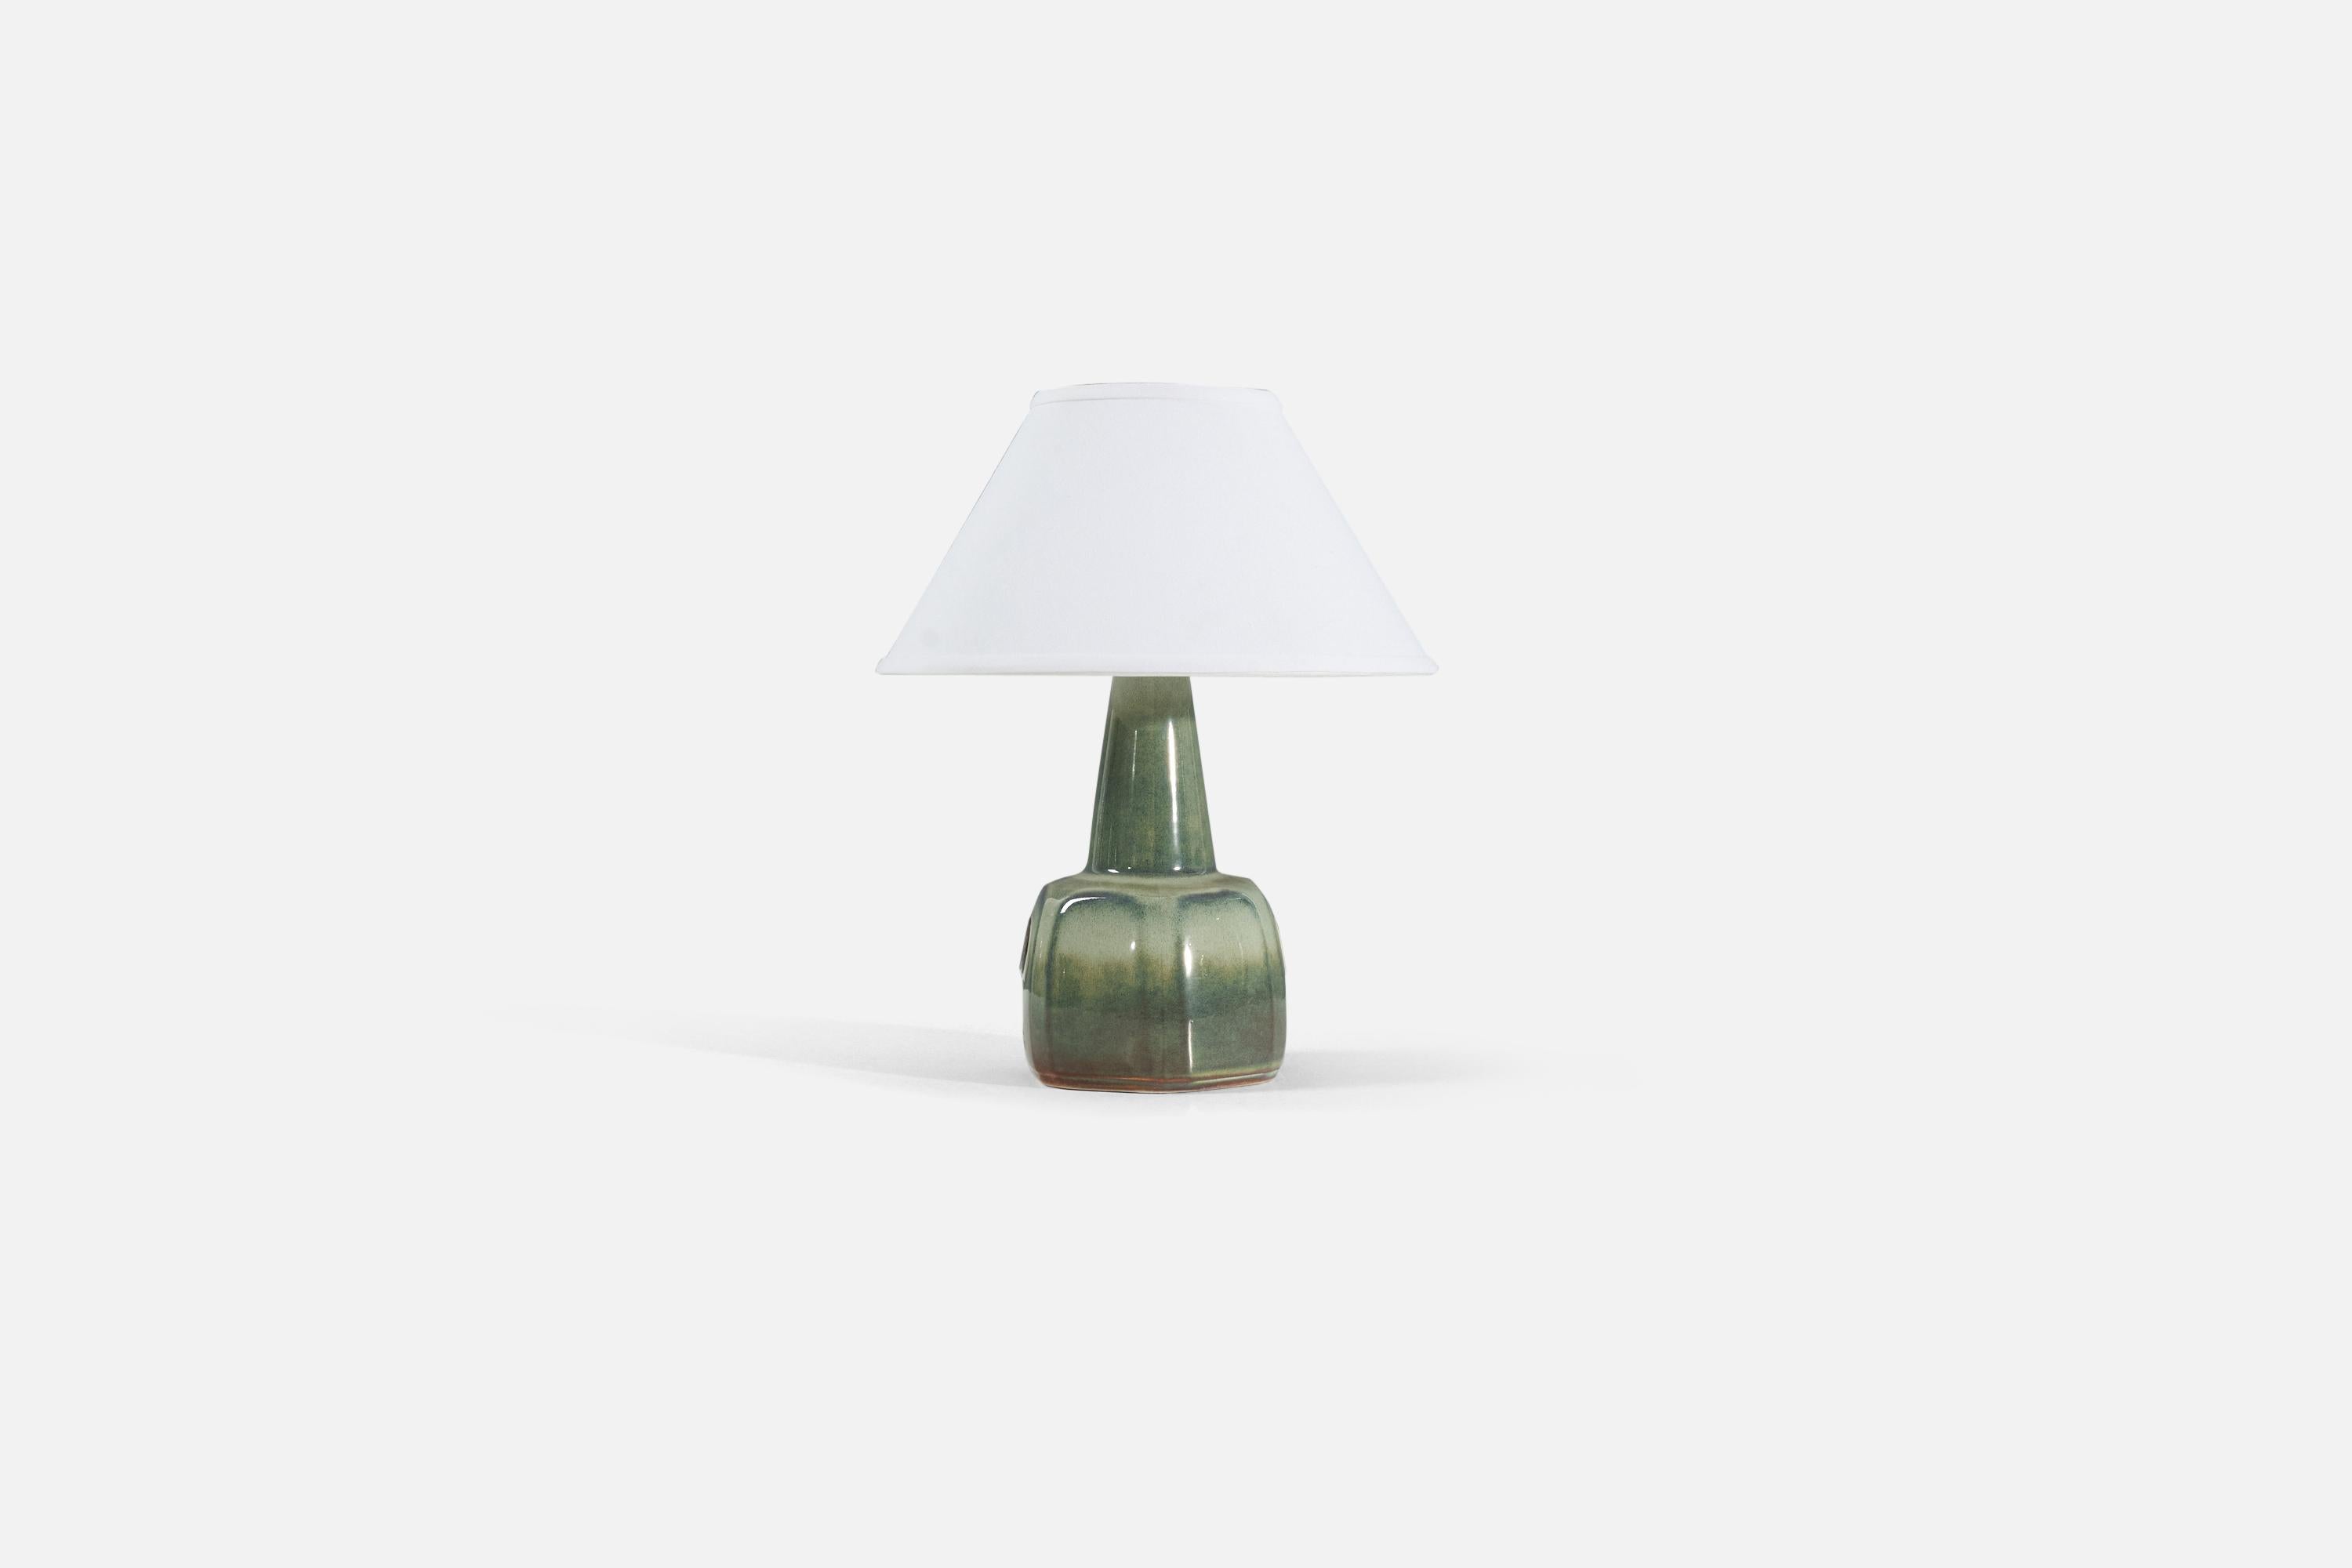 A green-glazed stoneware table lamp, produced by Søholm Stentøj, Sweden, 1960s.

Lamp sold without a lampshade. 

Measurements listed are of lamp. 
Shade : 5 x 12.25 x 7.25
Lamp with shade : 15.5 x 12.25 x 12.25.